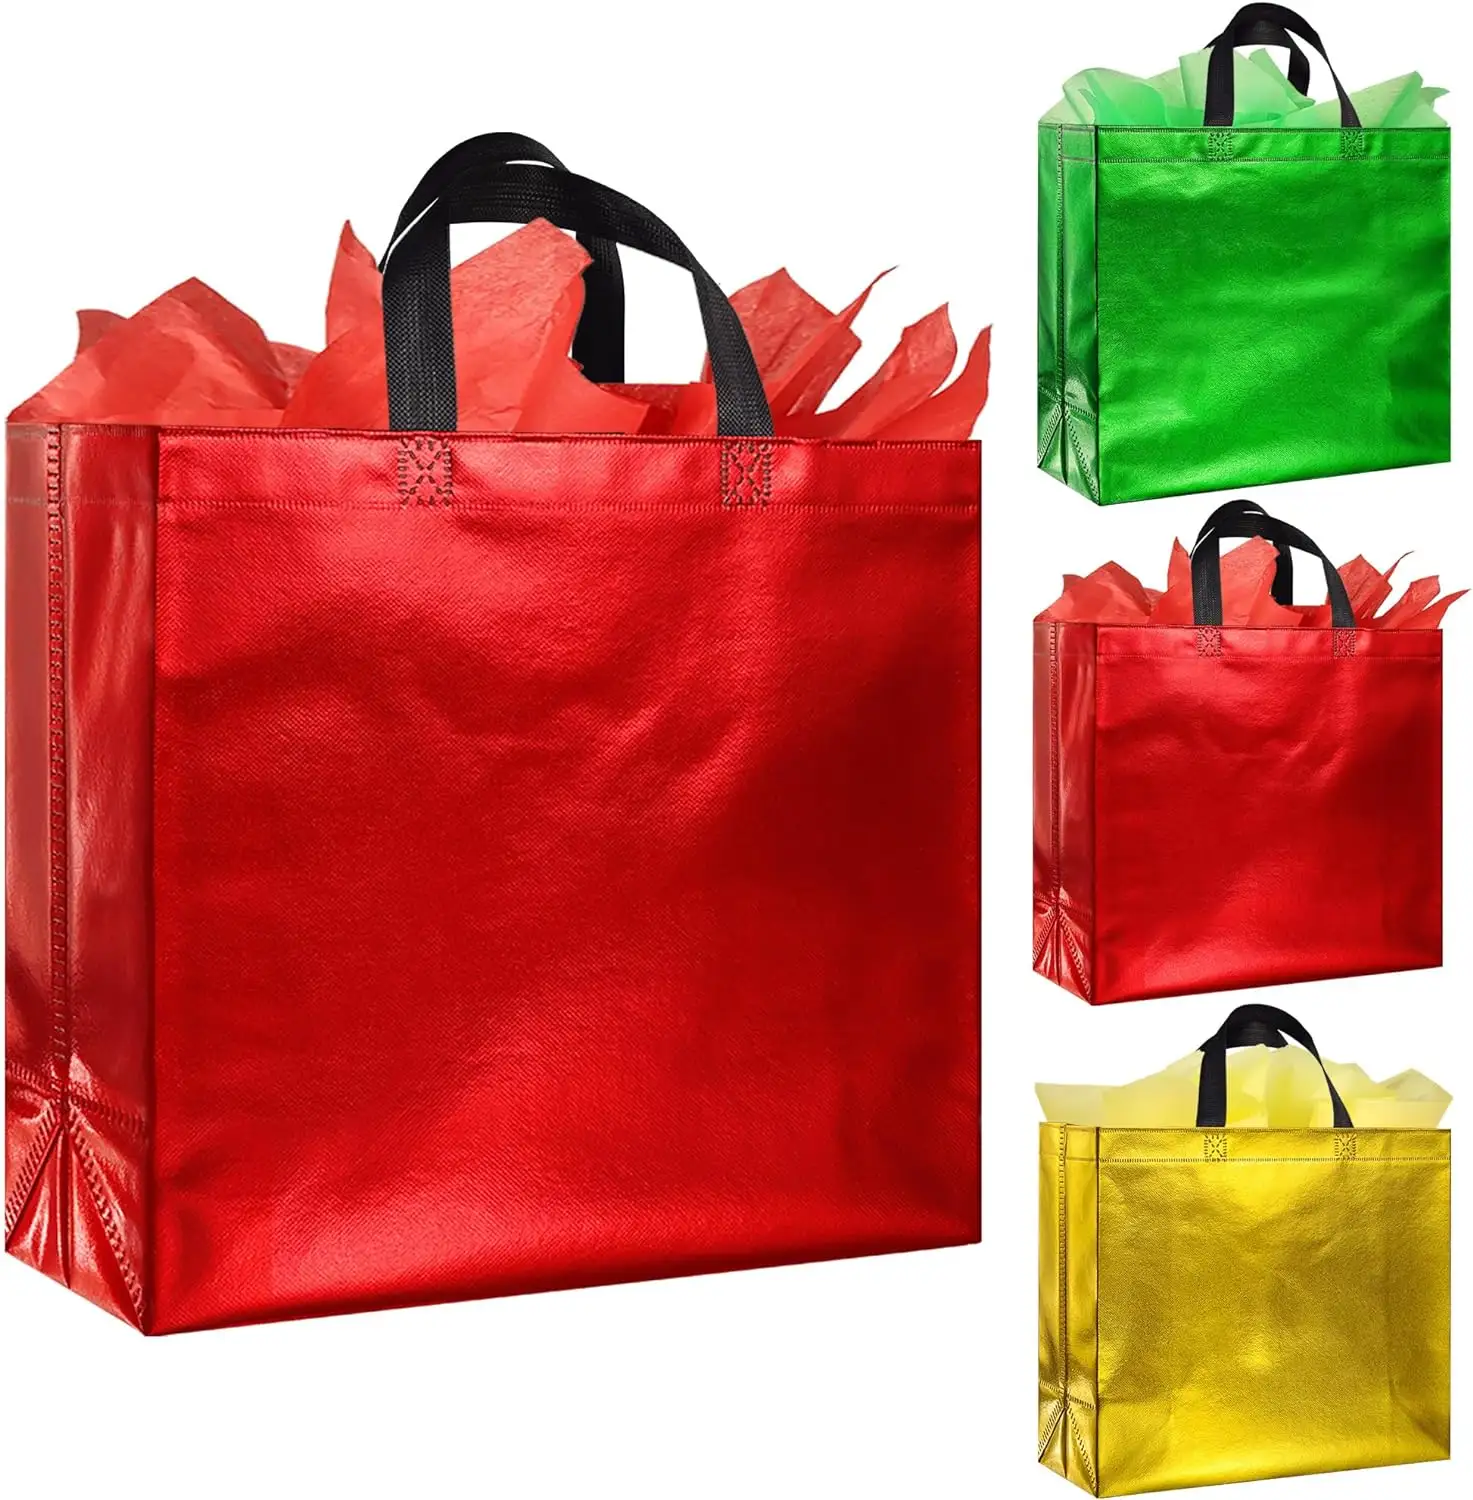 Practical Durable Present Large Shiny Tote Bags Aluminized Film Reusable Non-Woven Gift Bag With Glossy Finish For Enjoy In Diy